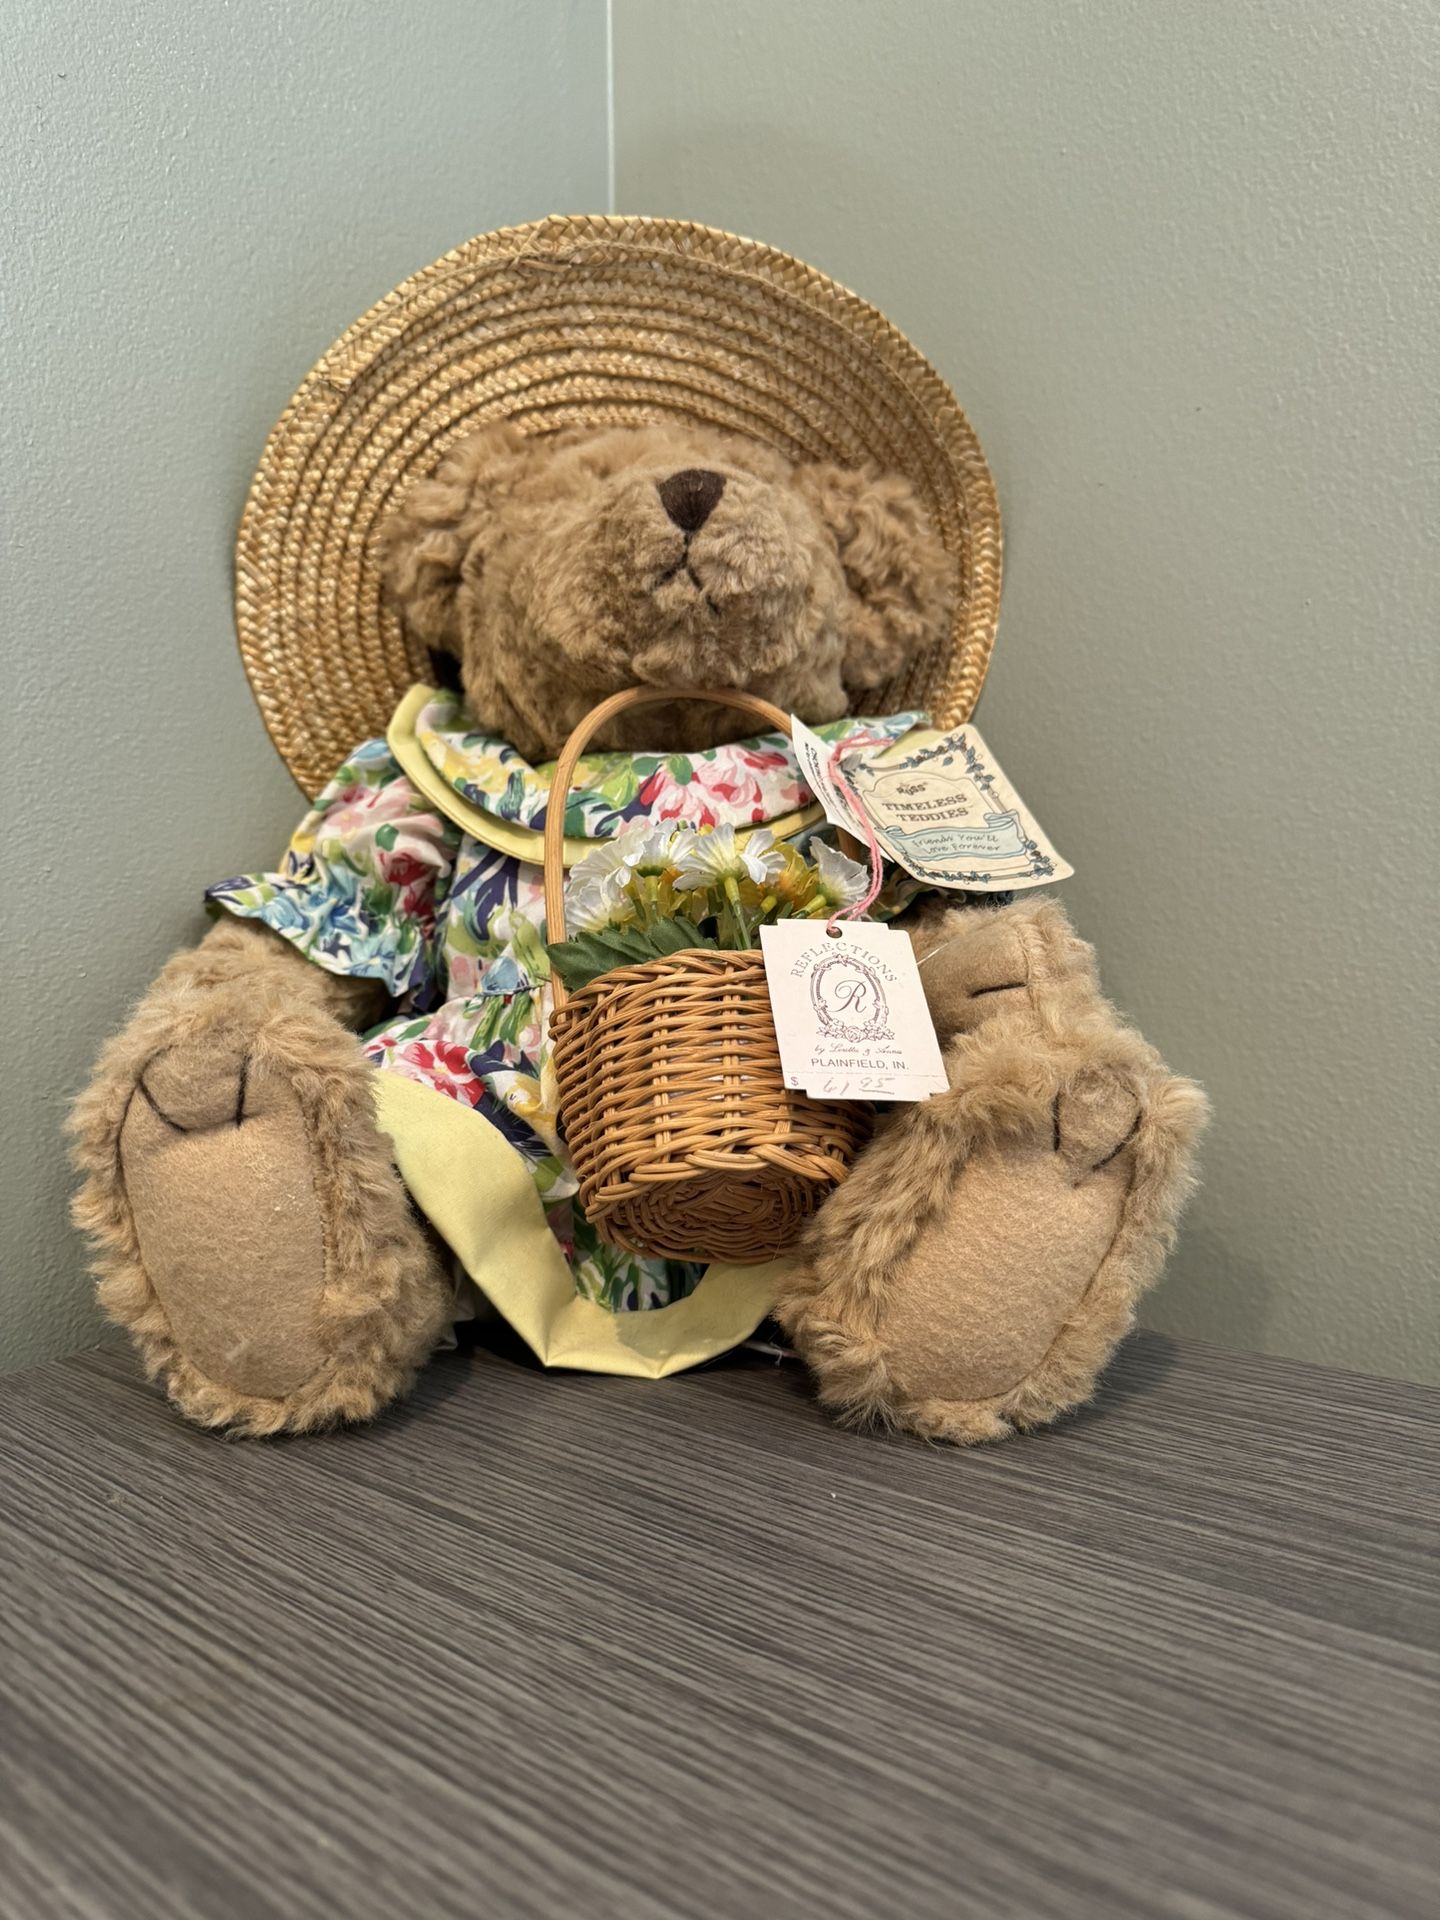 Russ “Timeless Teddies” Bear in Floral Dress with Straw Hat – Collectible Plush